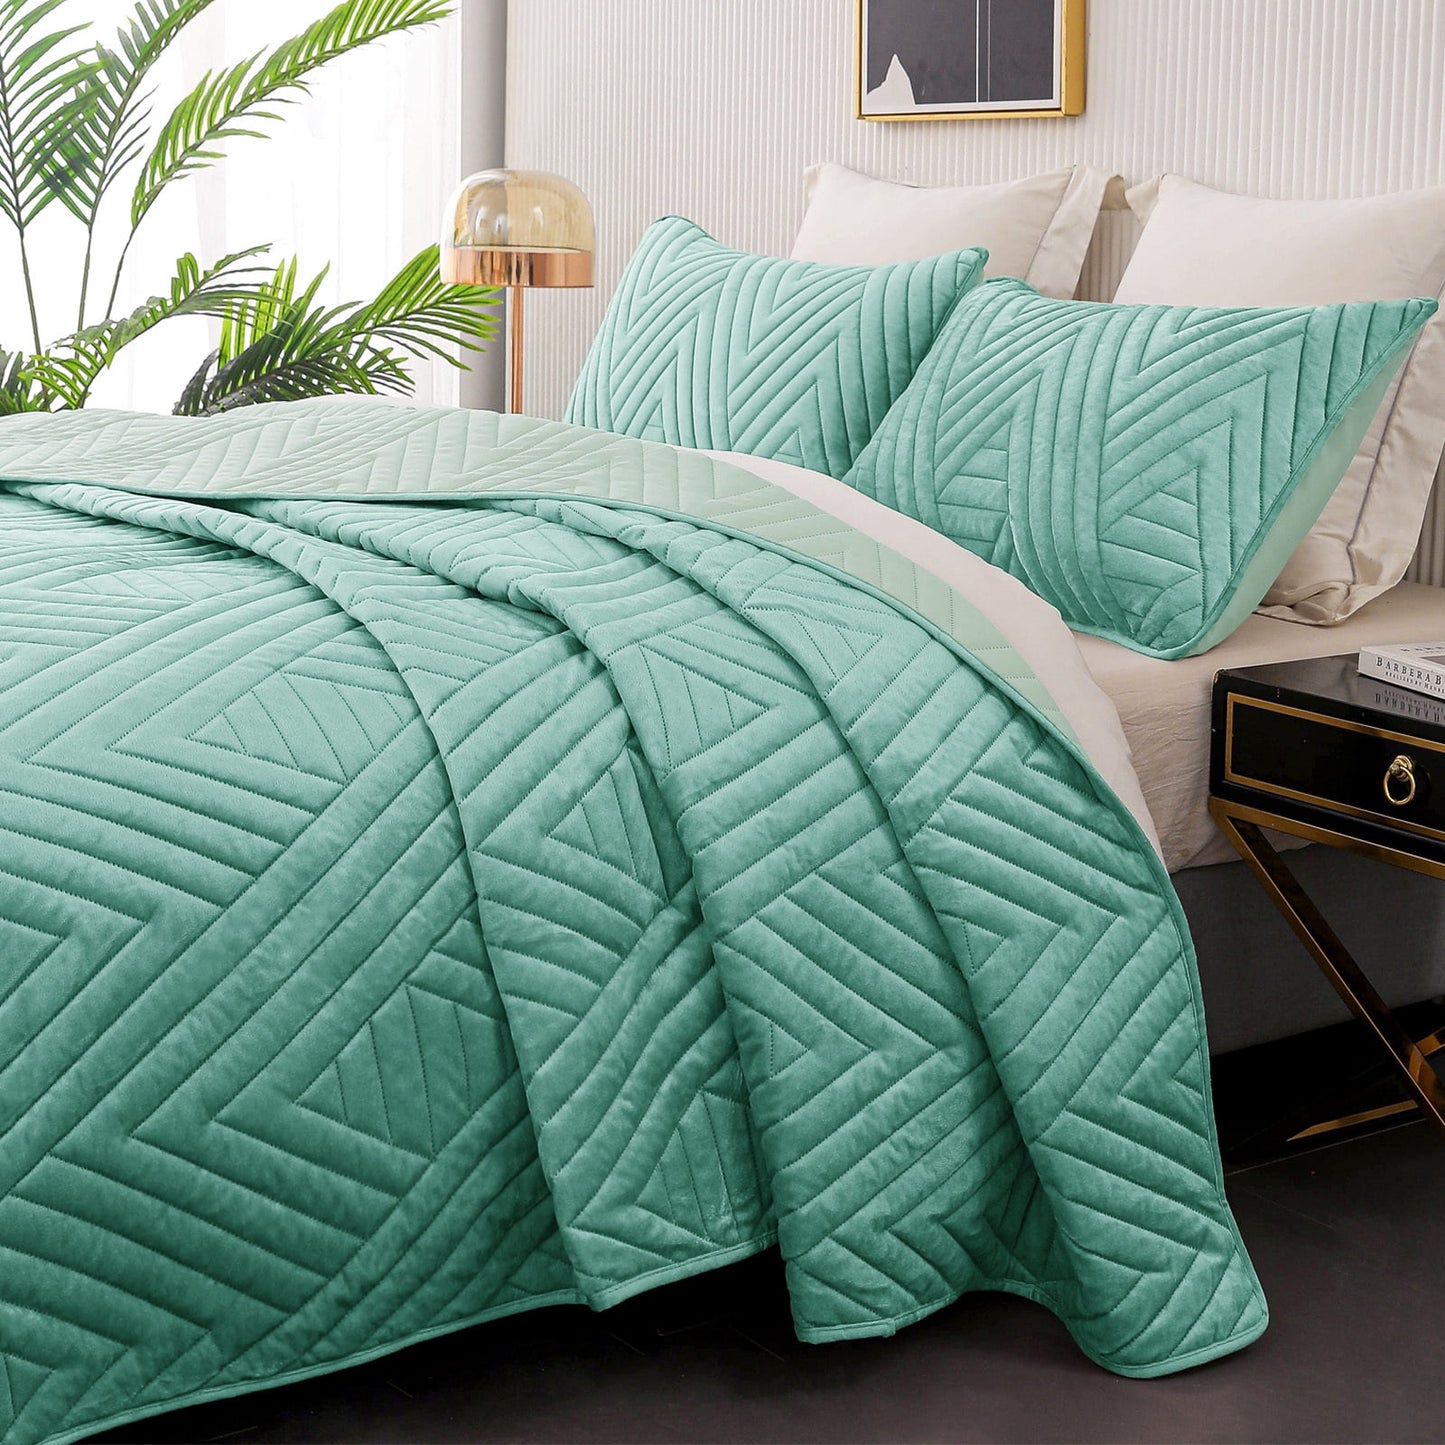 Exclusivo Mezcla Super Plush Velvet Quilt King Size with Pillow Shams, Luxury Soft Reversible 3 Piece Bedspreads Coverlet Comforter set for all seasons, Lightweight and Warm, Aqua Green